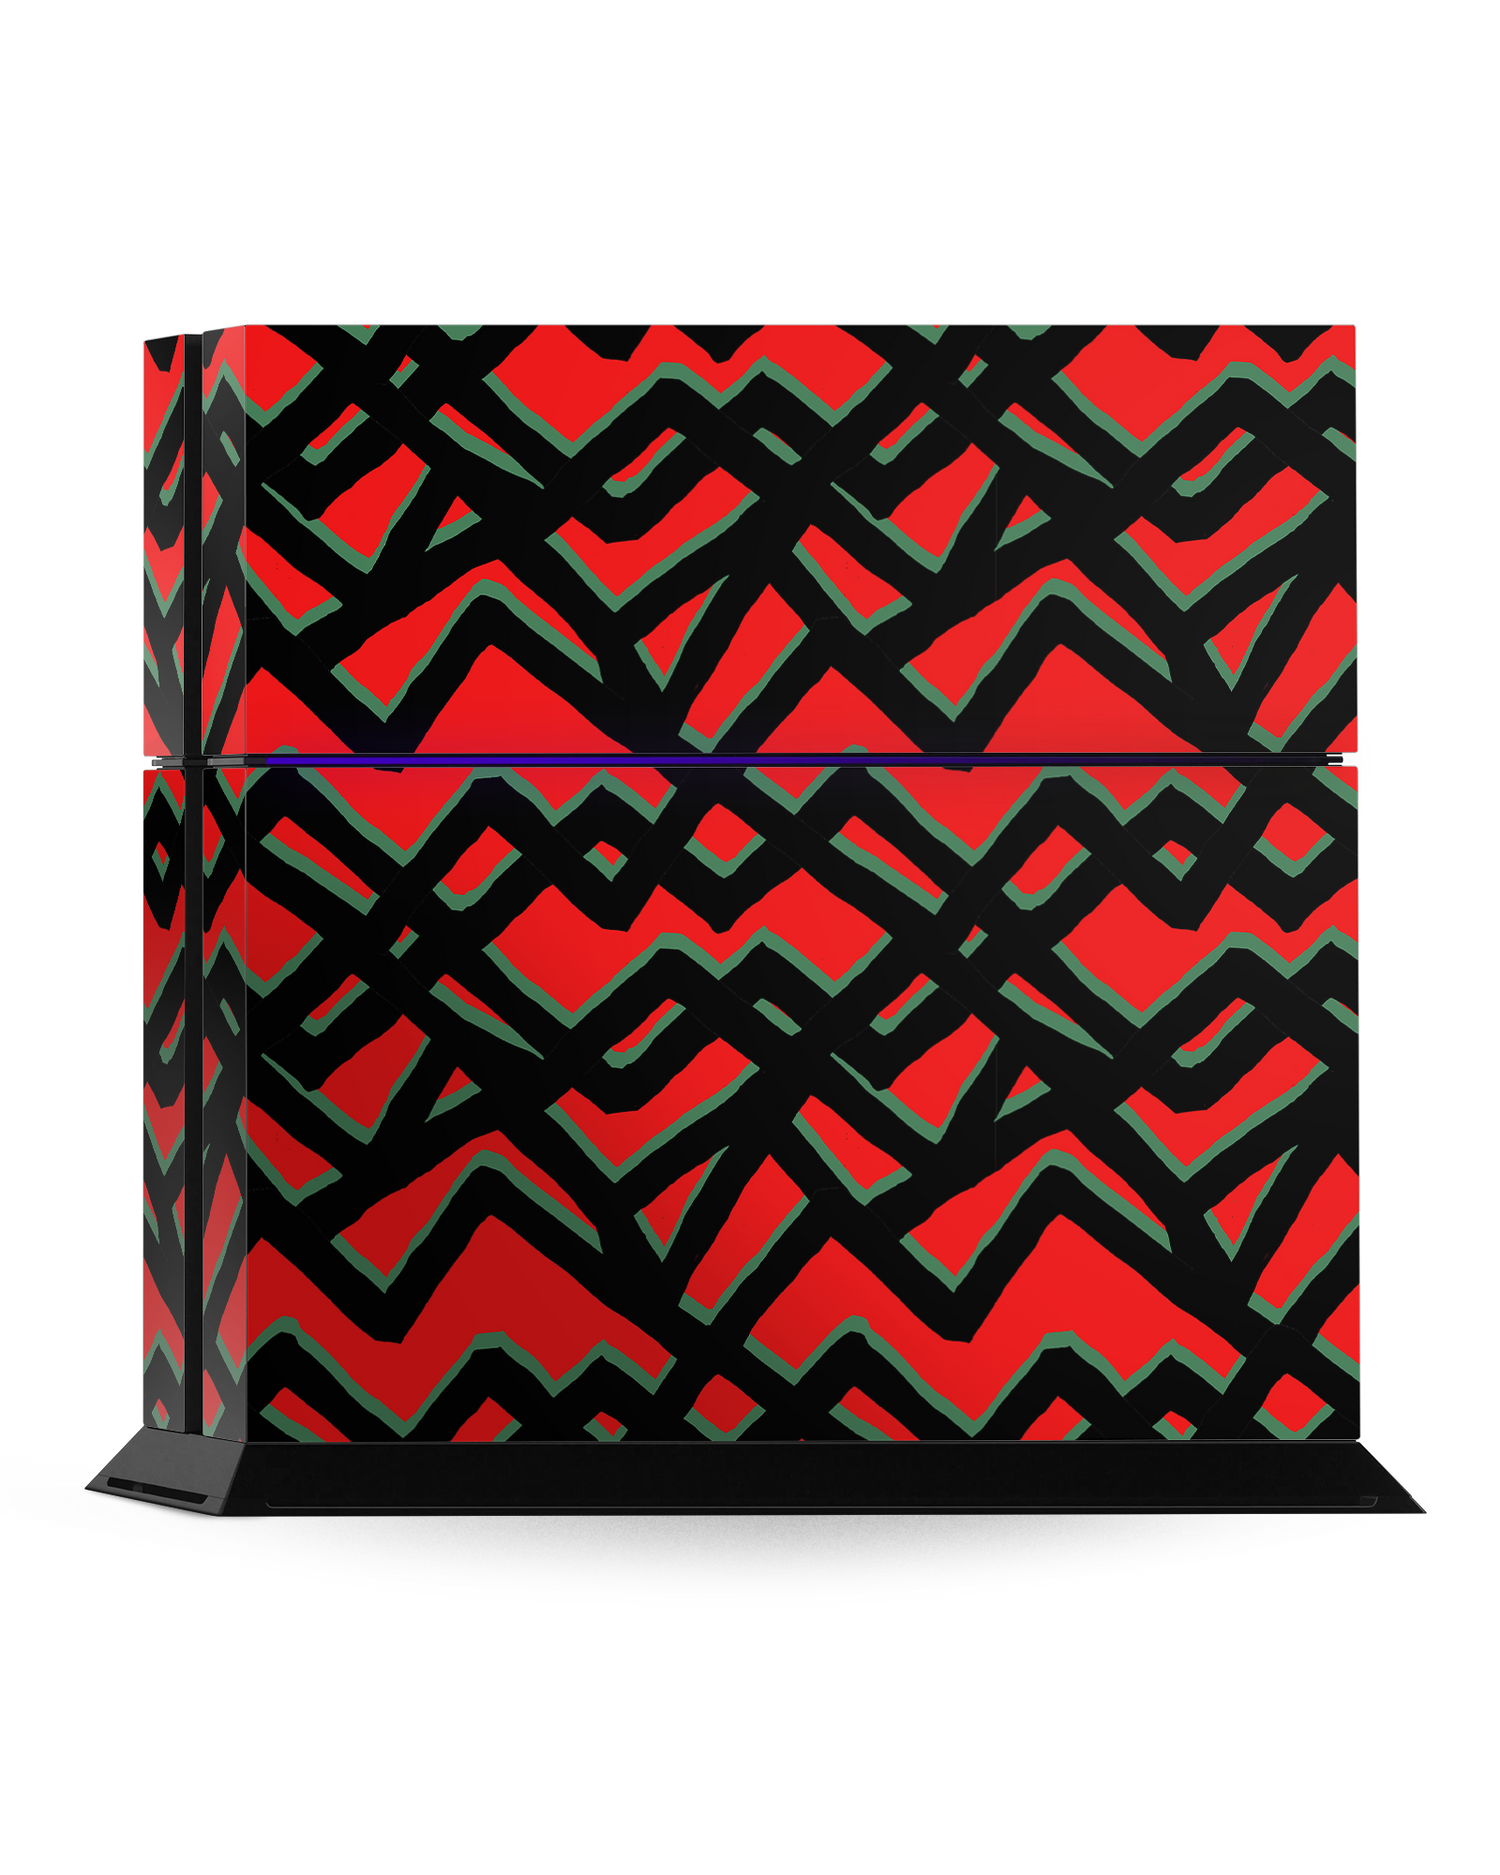 Fences Pattern Console Skin for Sony PlayStation 4: Standing